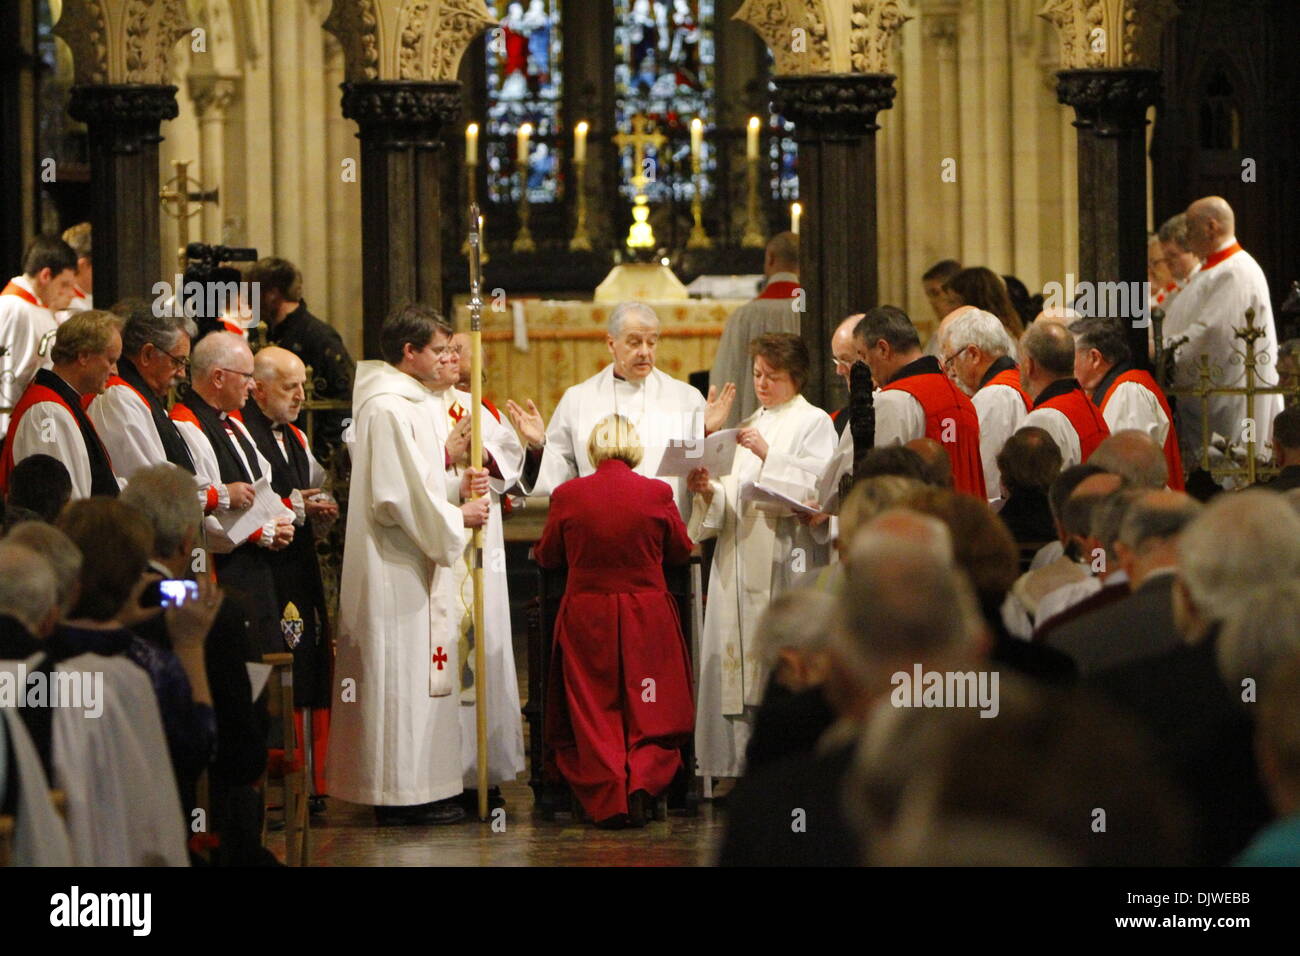 Dublin, Ireland. 30th November 2013. The bishop-elect, the Revd Pat Storey, kneels before the three consecrating bishops (The bishop of Derry and Raphoe, the Archbishop of Dublin and the Bishop of Cork, Cloyne and Ross) and the other attending bishops. The Most Revd Pat Storey has been consecrated as Church of Ireland Bishop of Meath and Kildare in Dublin's Christ Church Cathedral. Credit:  Michael Debets/Alamy Live News Stock Photo